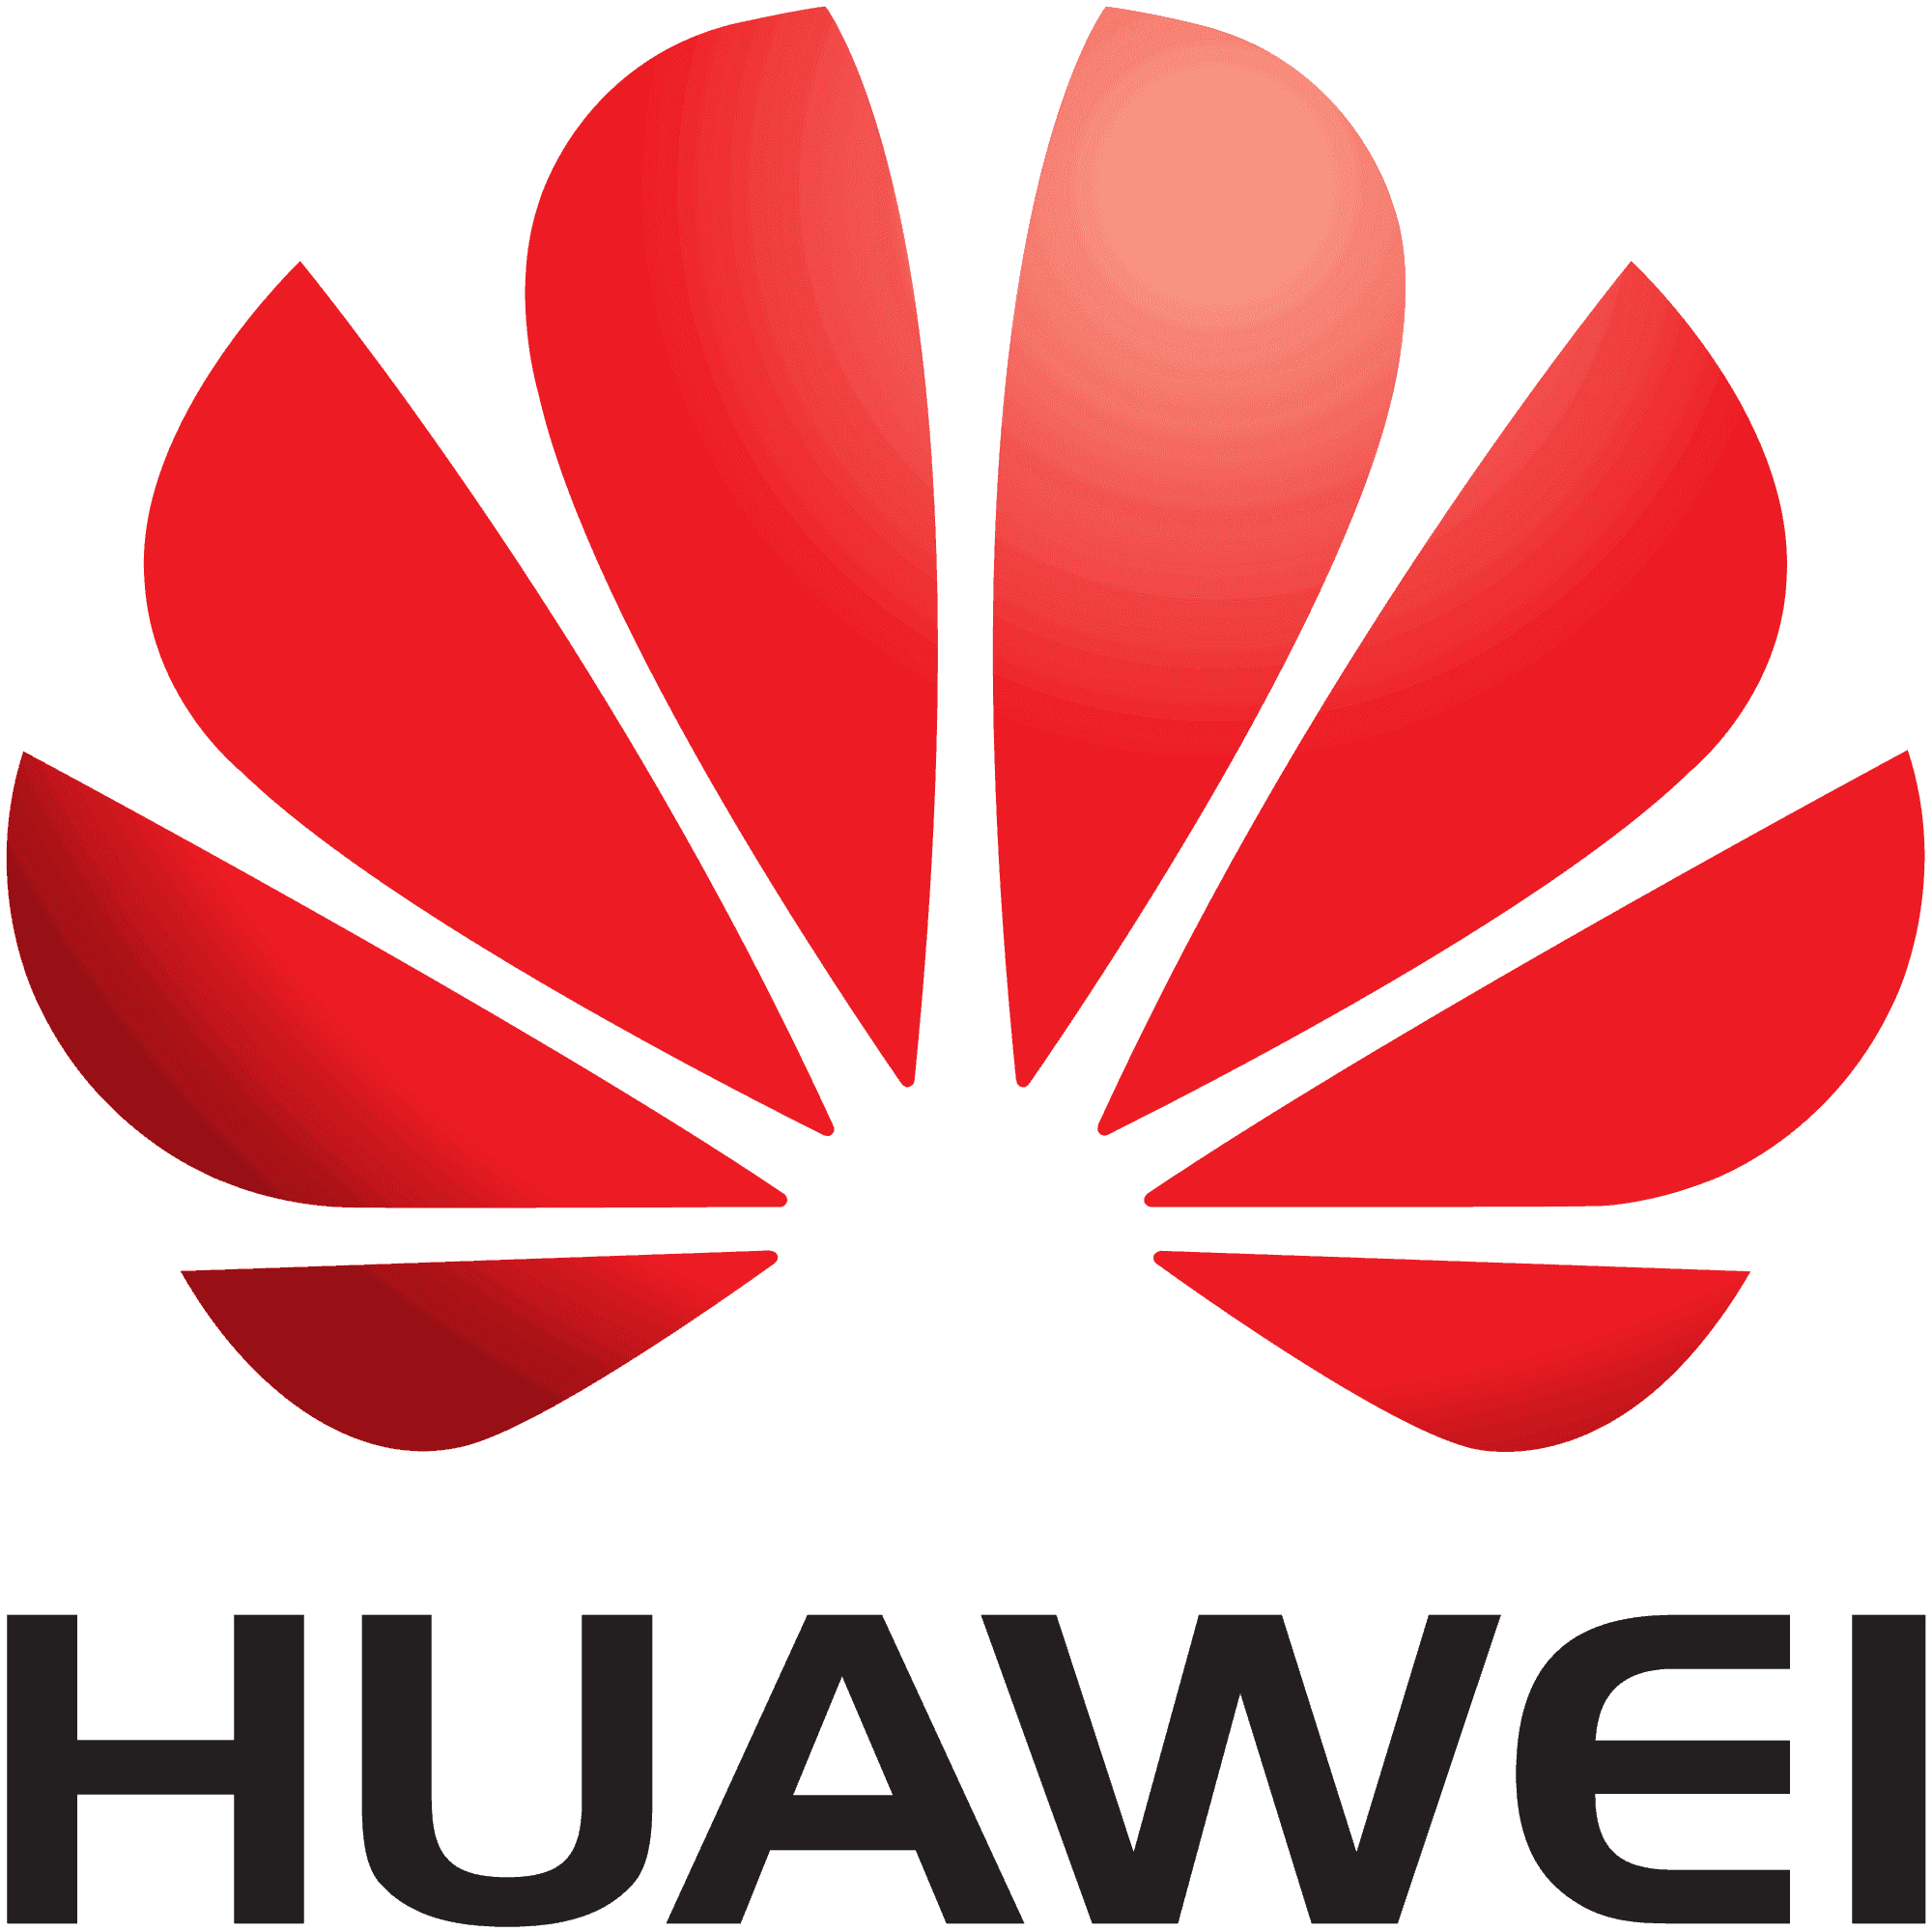 2000px-Huawei.svg.png